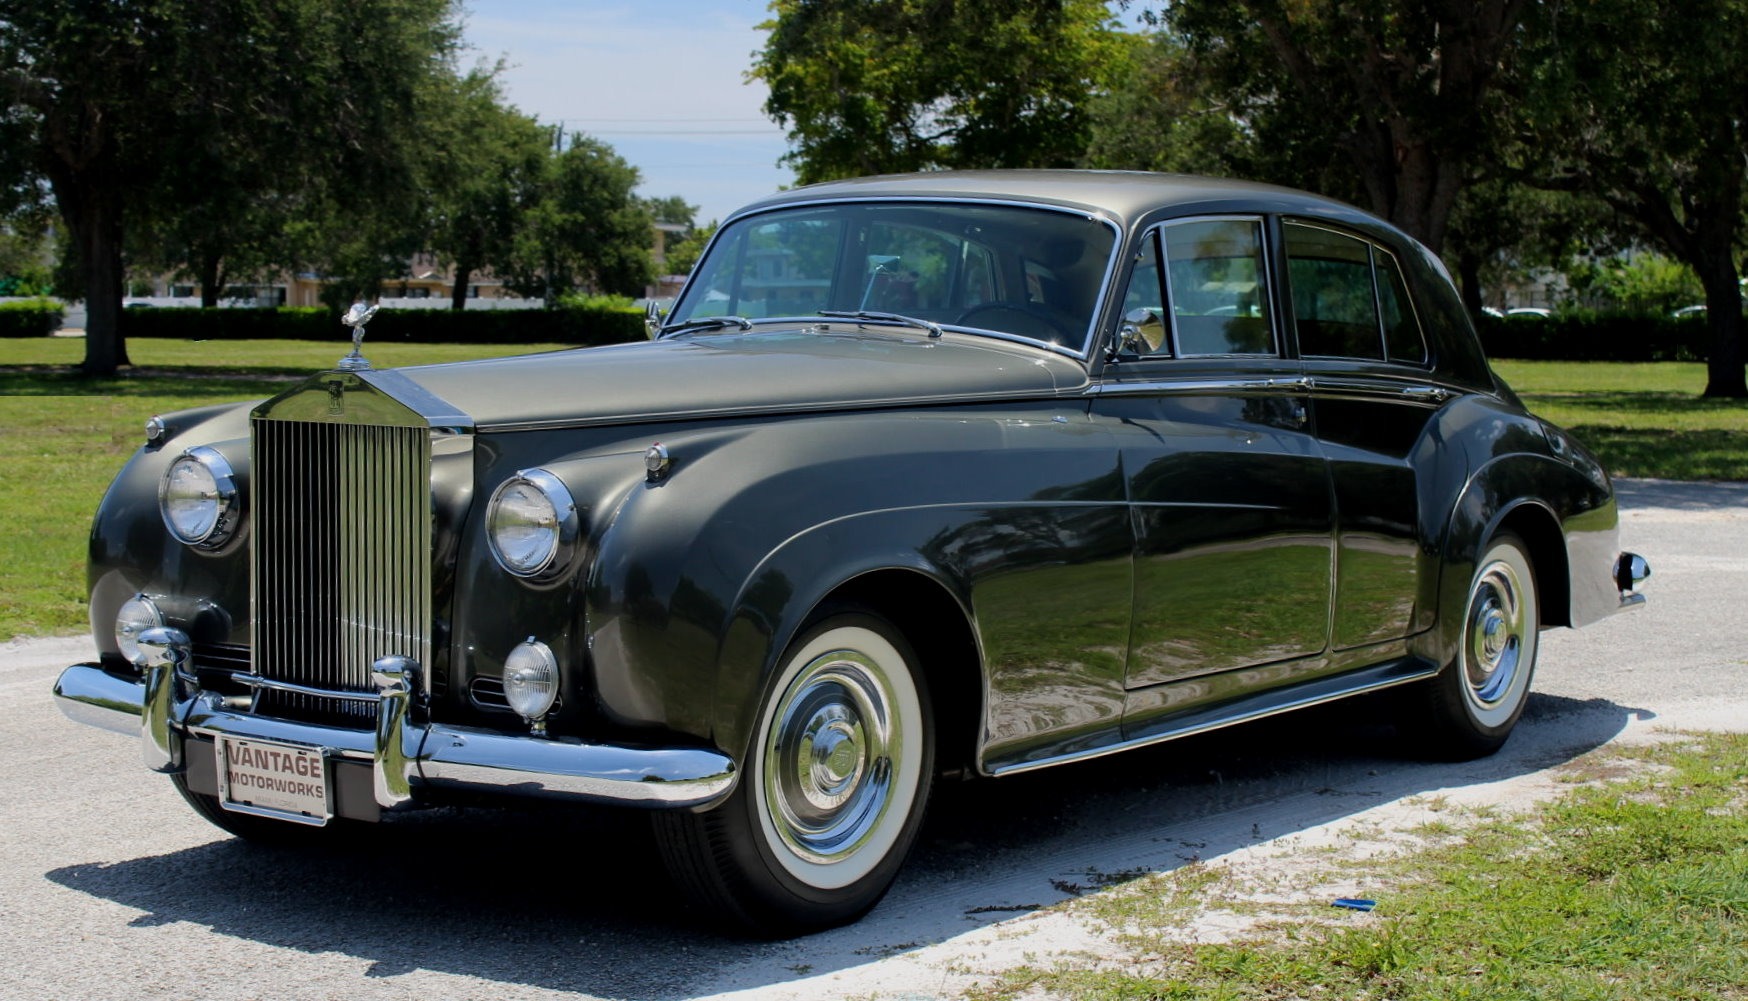 Wedding Cars For Hire to Receive Best Price on a Classic 1960 Rolls Royce  Silver Cloud 2